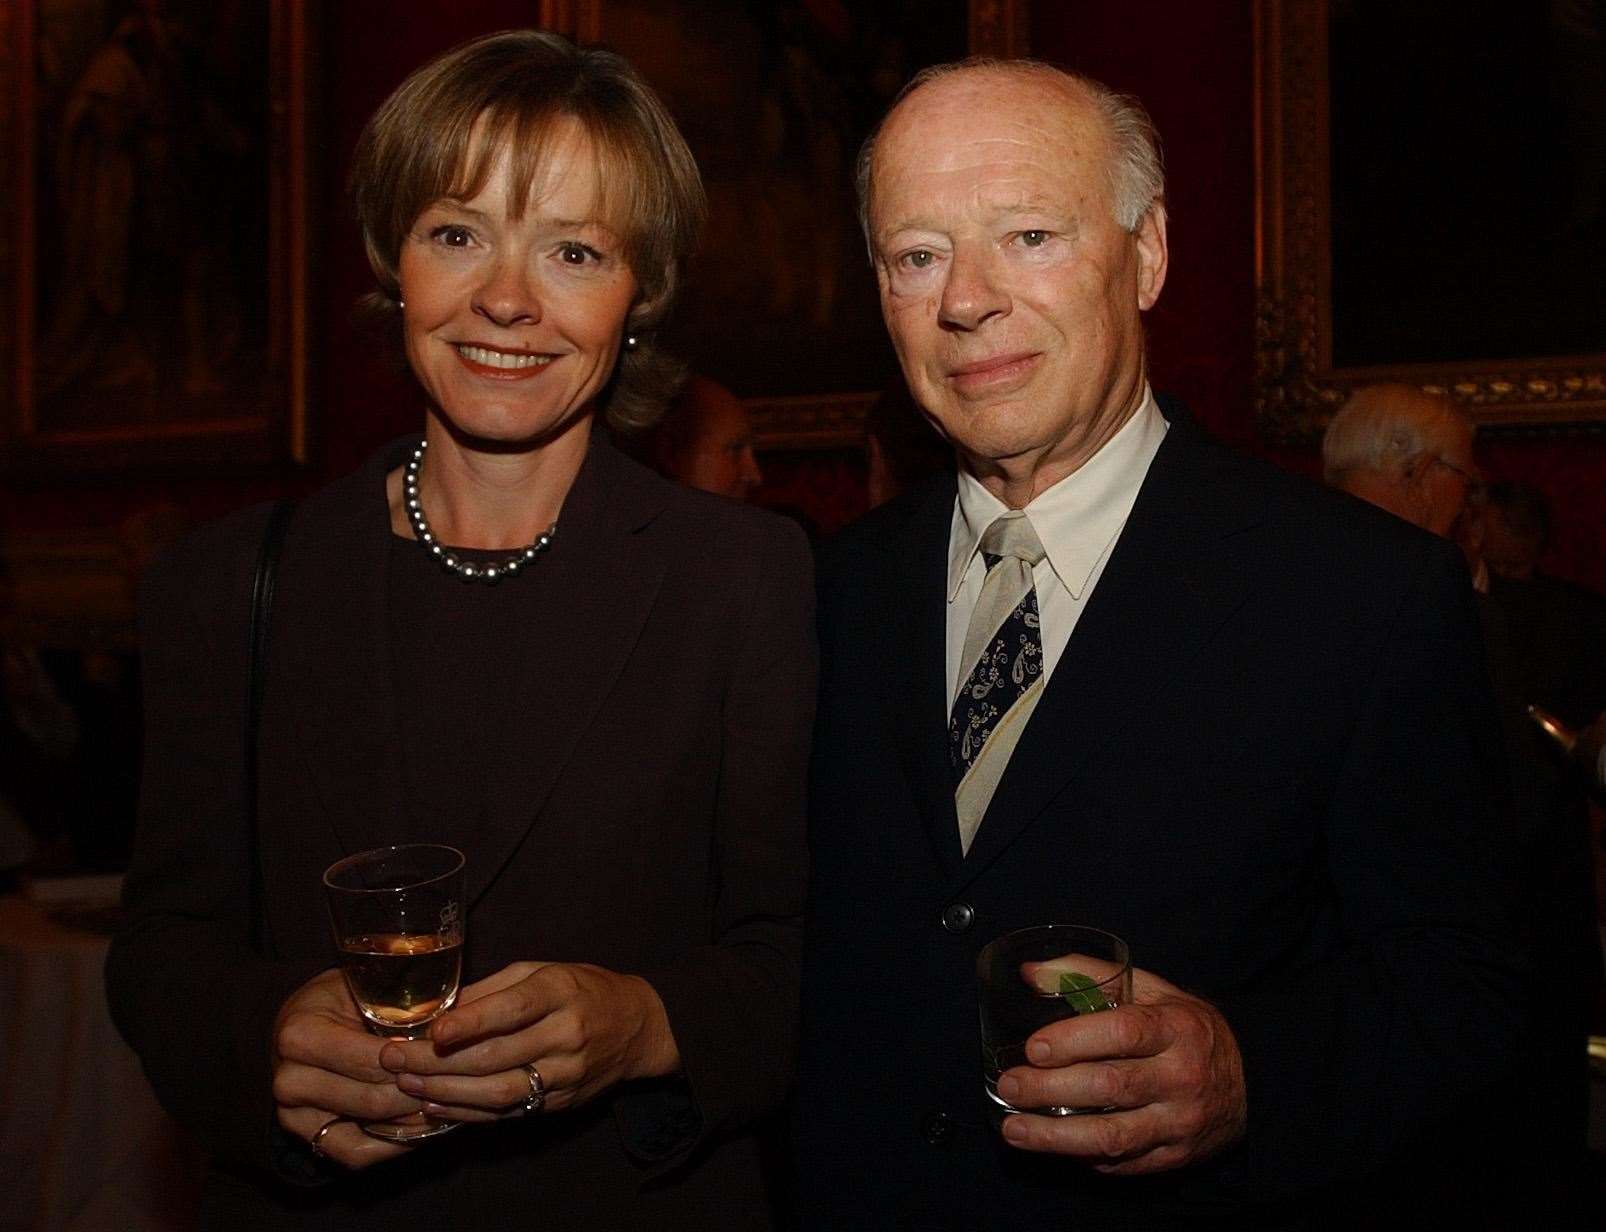 Bernard Haitink and his wife Patricia in 2002 (Kirsty Wigglesworth/PA)